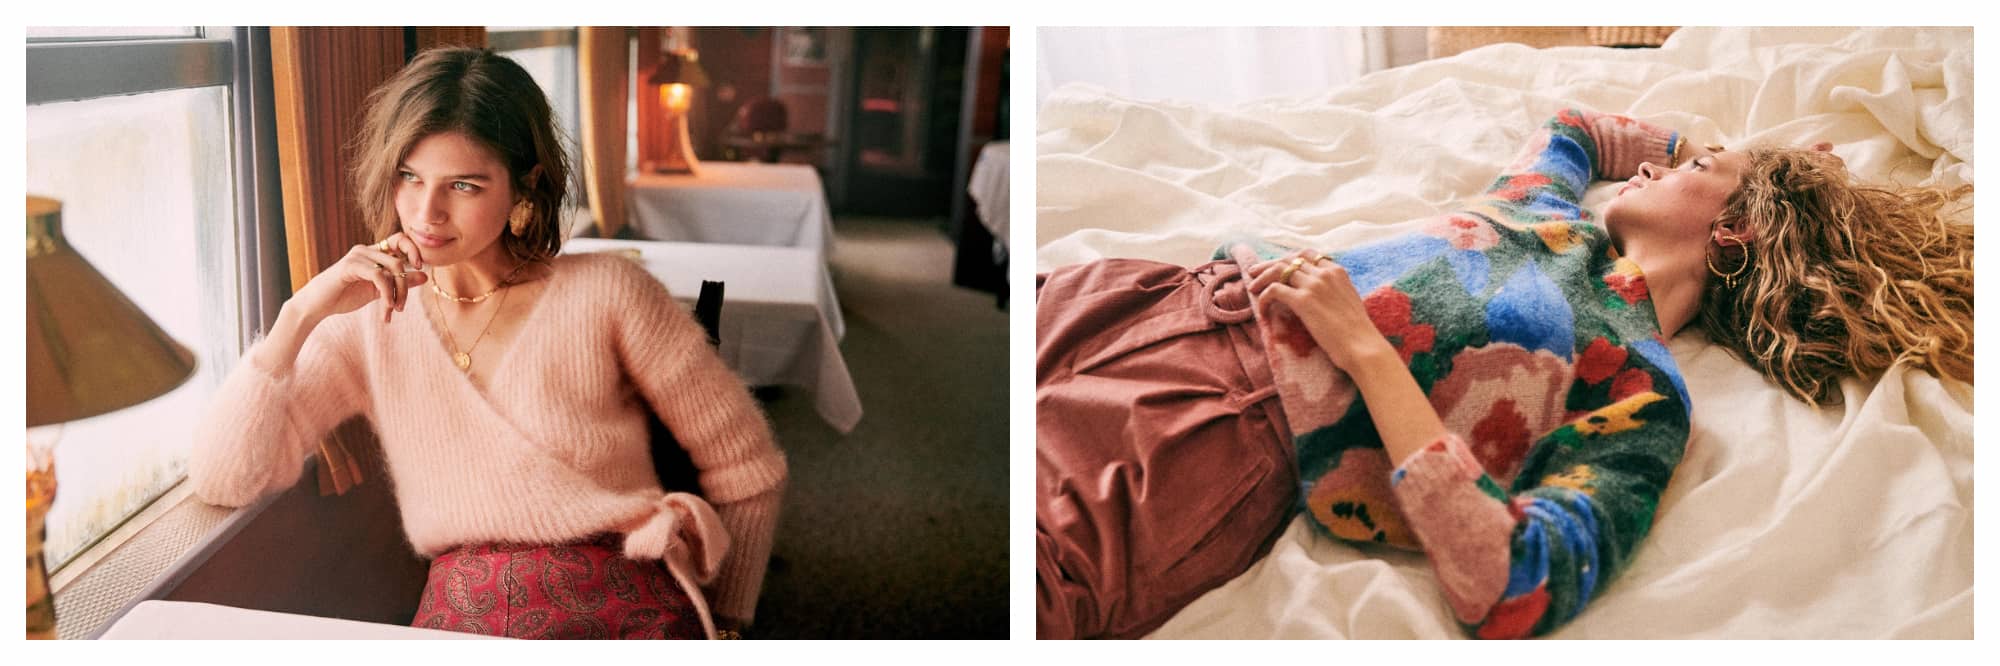 On left: a model leans back in a chair at a restaurant, looking out the window as sunlight floods her face. She wears a fuzzy, ribbed pink v-neck cardigan with three-quarter sleeves that ties in a neat bow, by the Paris-based fashion brand Séazne. On right: a model lays on an unmade bed as sunlight spills in through the window. She is wearing a floral-patterned sweater with large swatches of dusty rose, deep green, and dark blue. Complimenting the roses are her paper-bag style high-waisted pants with a statement belt buckle. Both pieces are by the Paris-based fashion brand Sézane.